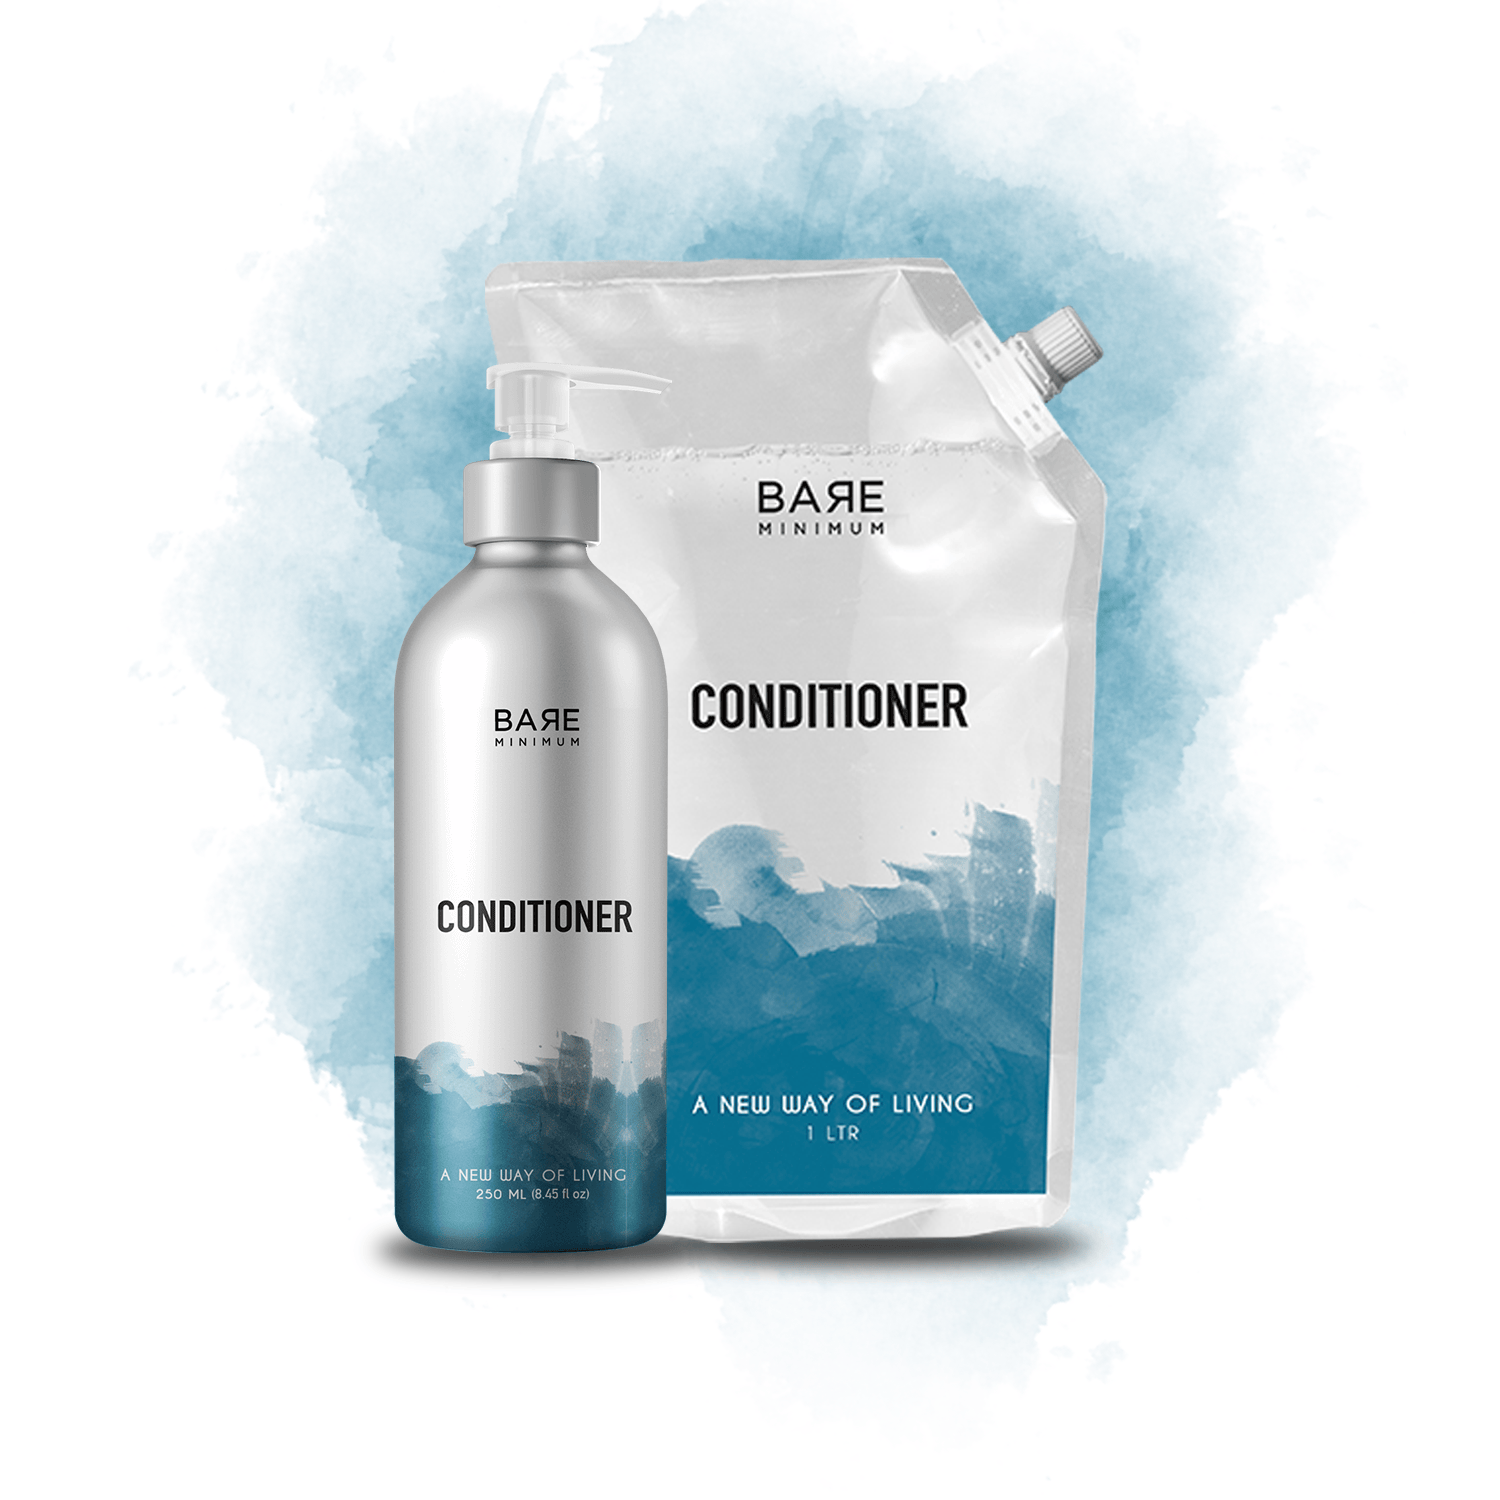 Bare Minimum | Combo of Conditioner Bottle + Refill Pack | With Extracts Of Aloe Vera And Amla | For Dandruff Free And Lustrous Hair | Chemical-Free | (Conditioner Bottle 250ML + Refill Pack 1L)